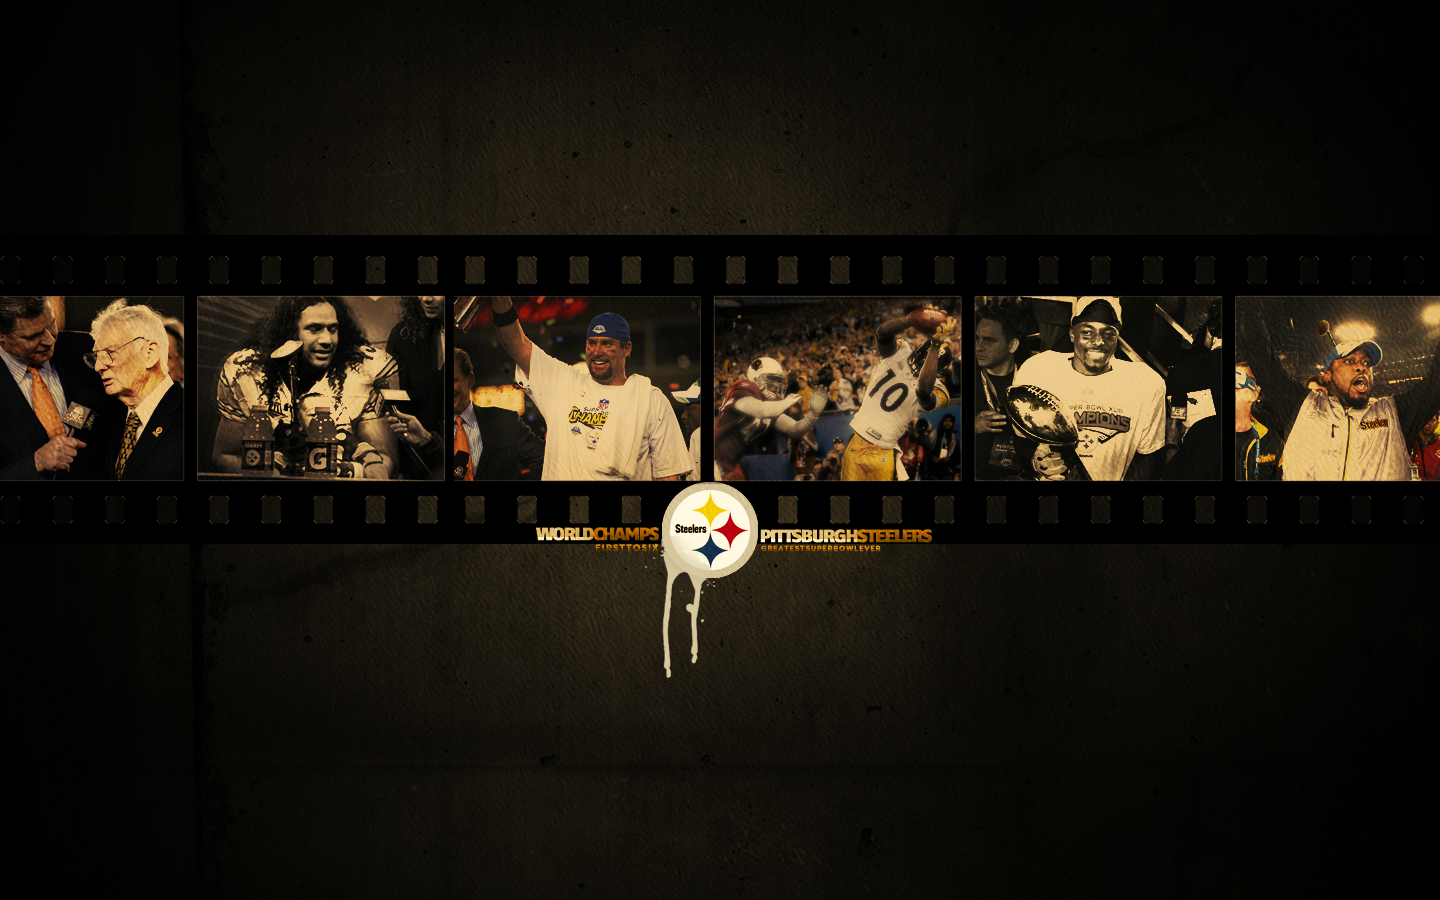 pittsburgh steelers wallpaper for comput Wallpaper